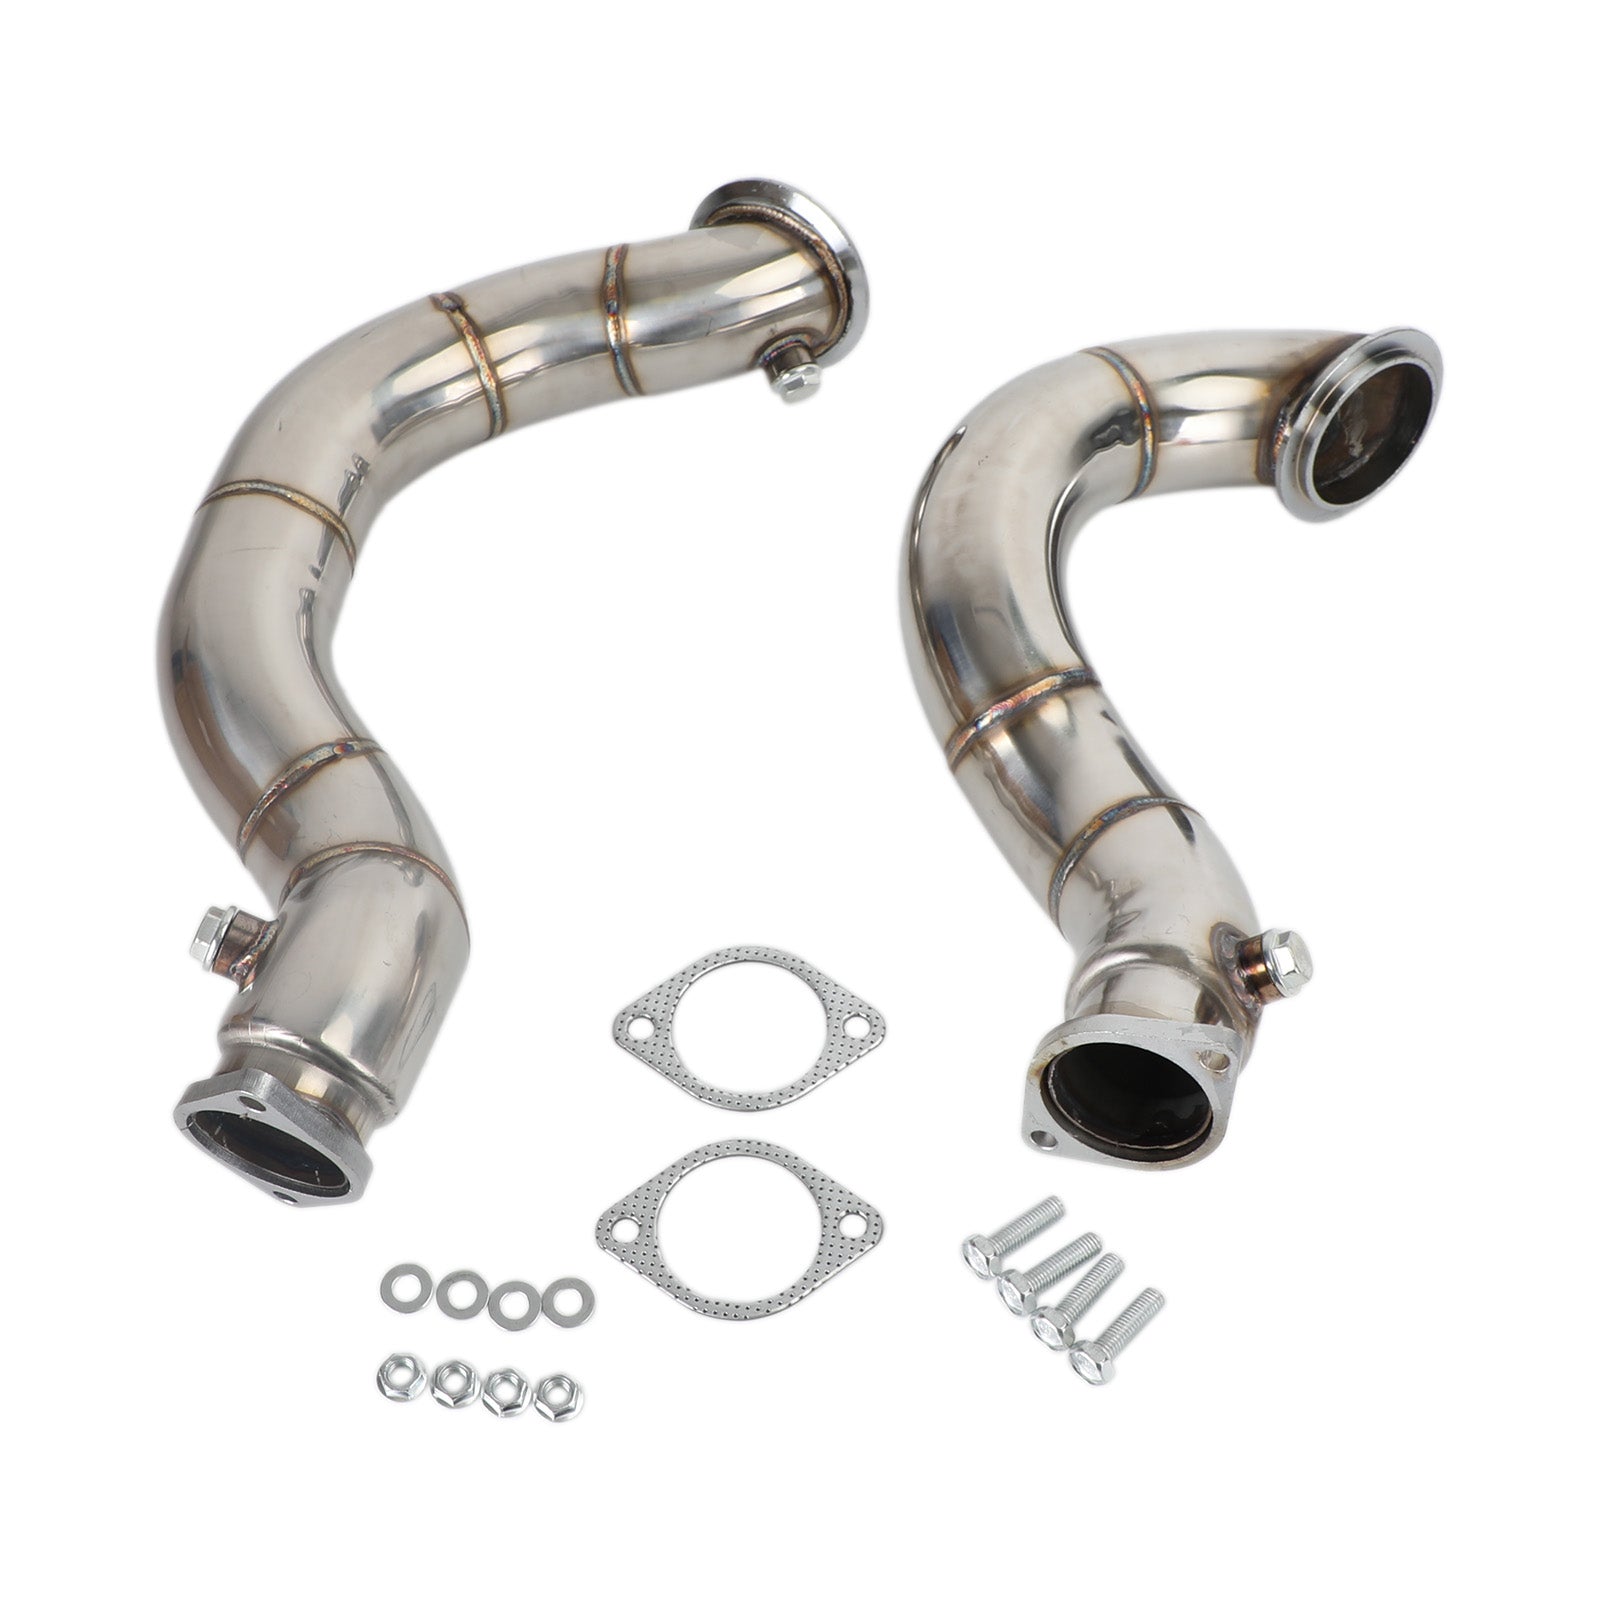 BMW 2007-2011 N54 335i E90 E92 3 inch Stainless Steel Exhaust Downpipe Pipes